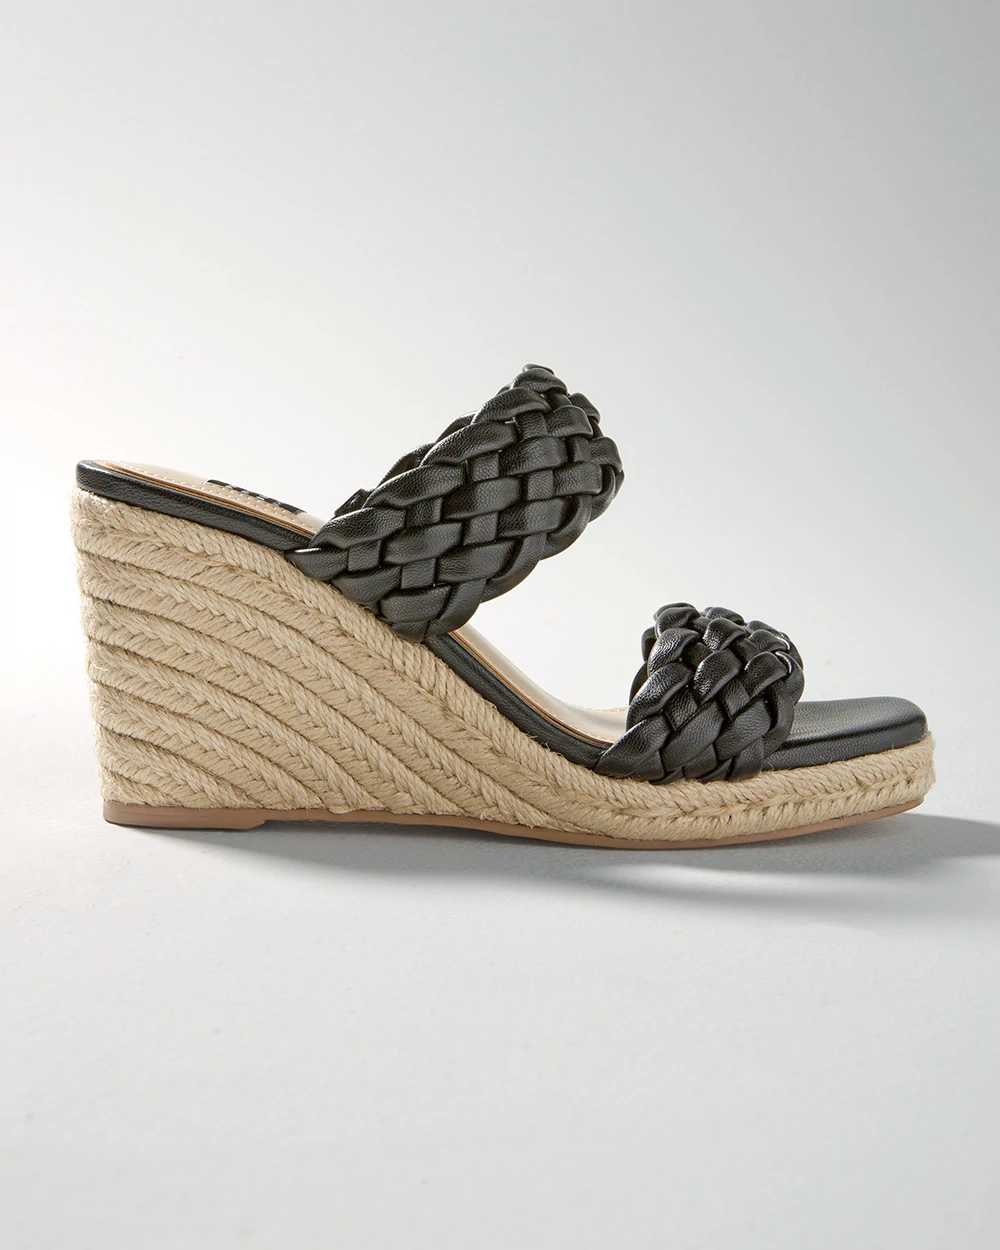 Braided High-Heel Wedge click to view larger image.